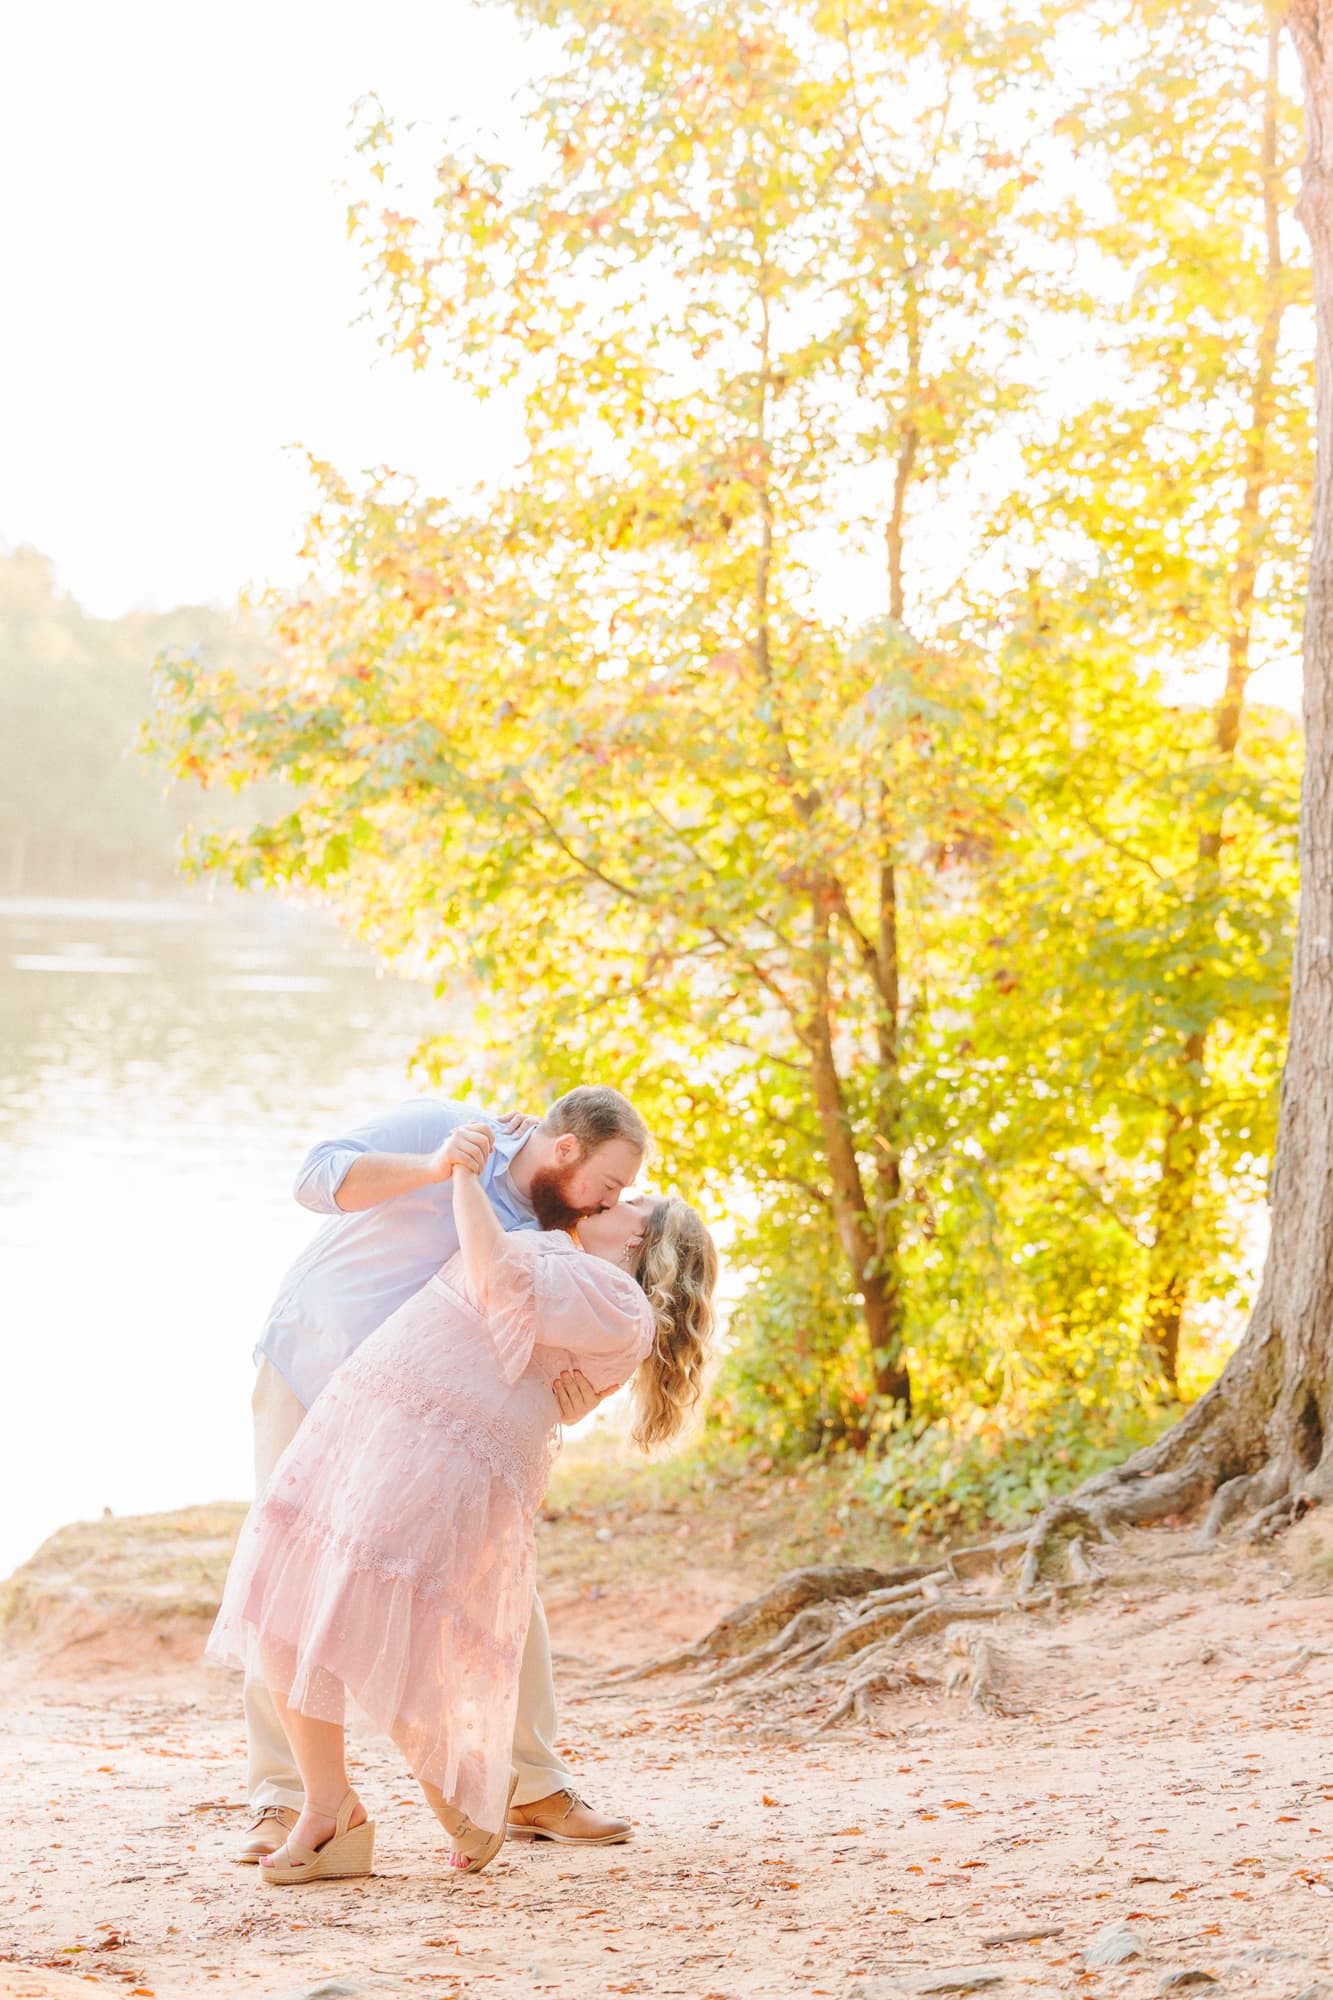 Shawn dips Shelby in a romantic kiss in Huntersville for their engagement photo session.